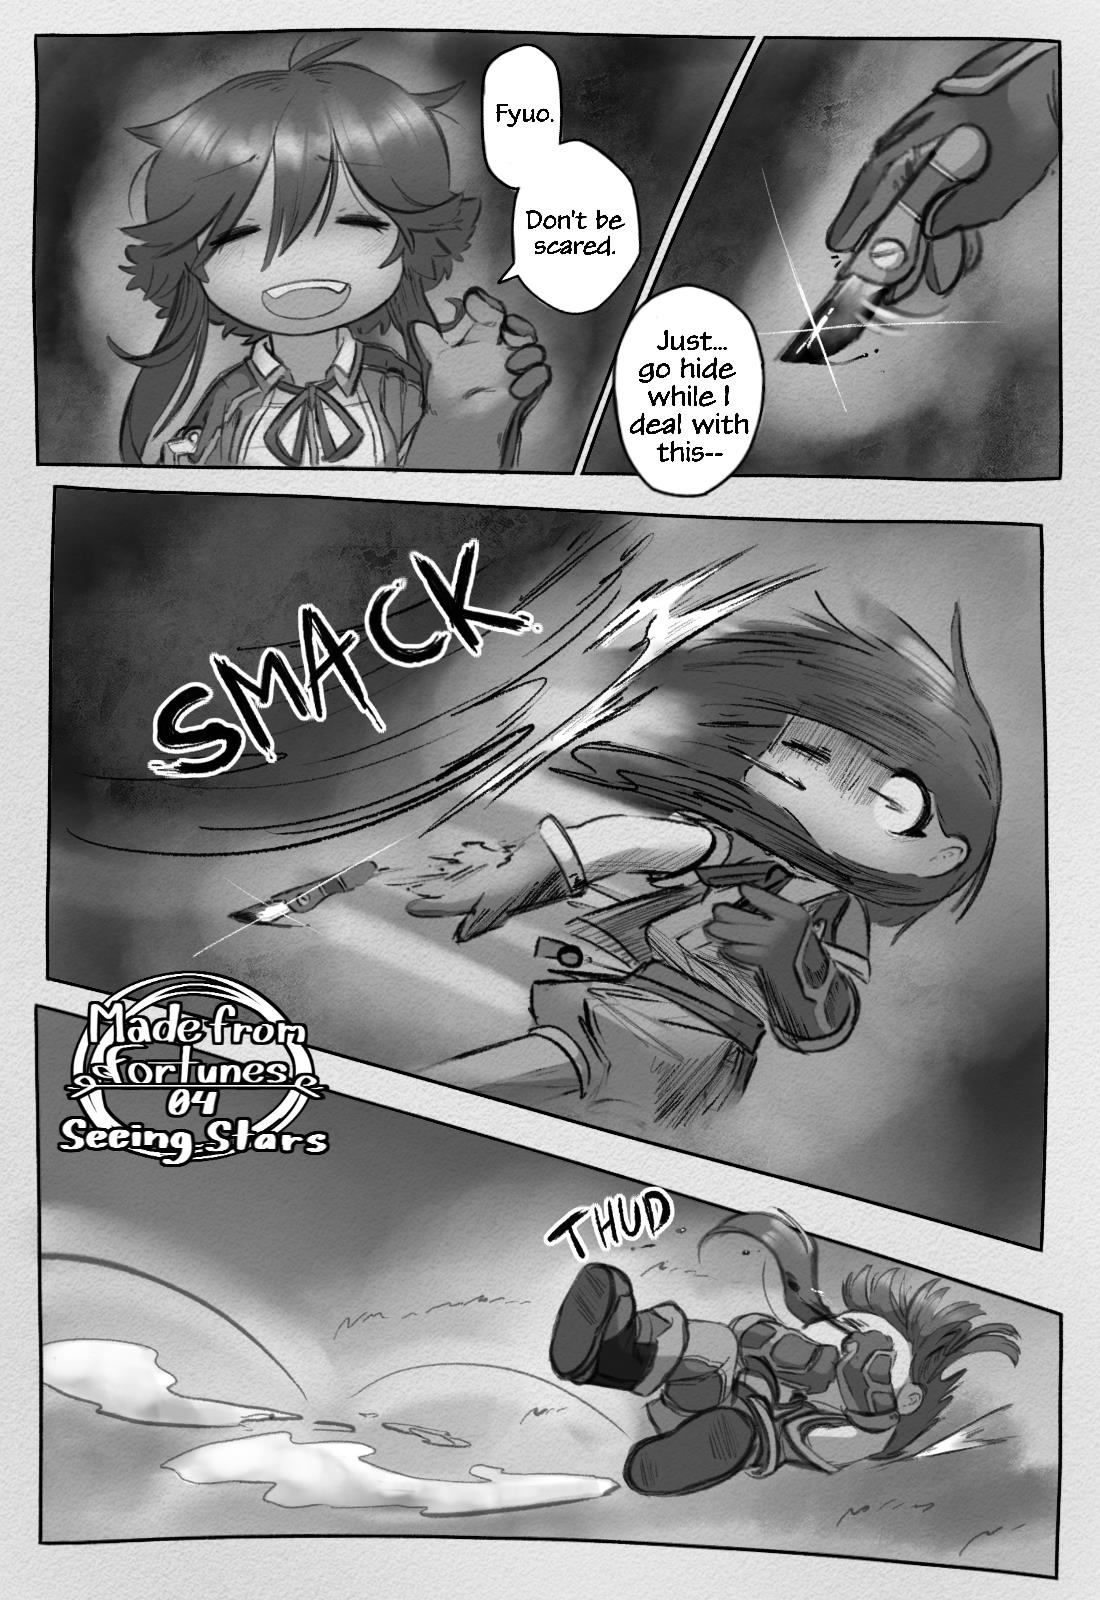 Made From Fortunes (Made In Abyss Fanmade Comic) - chapter 4 - #1